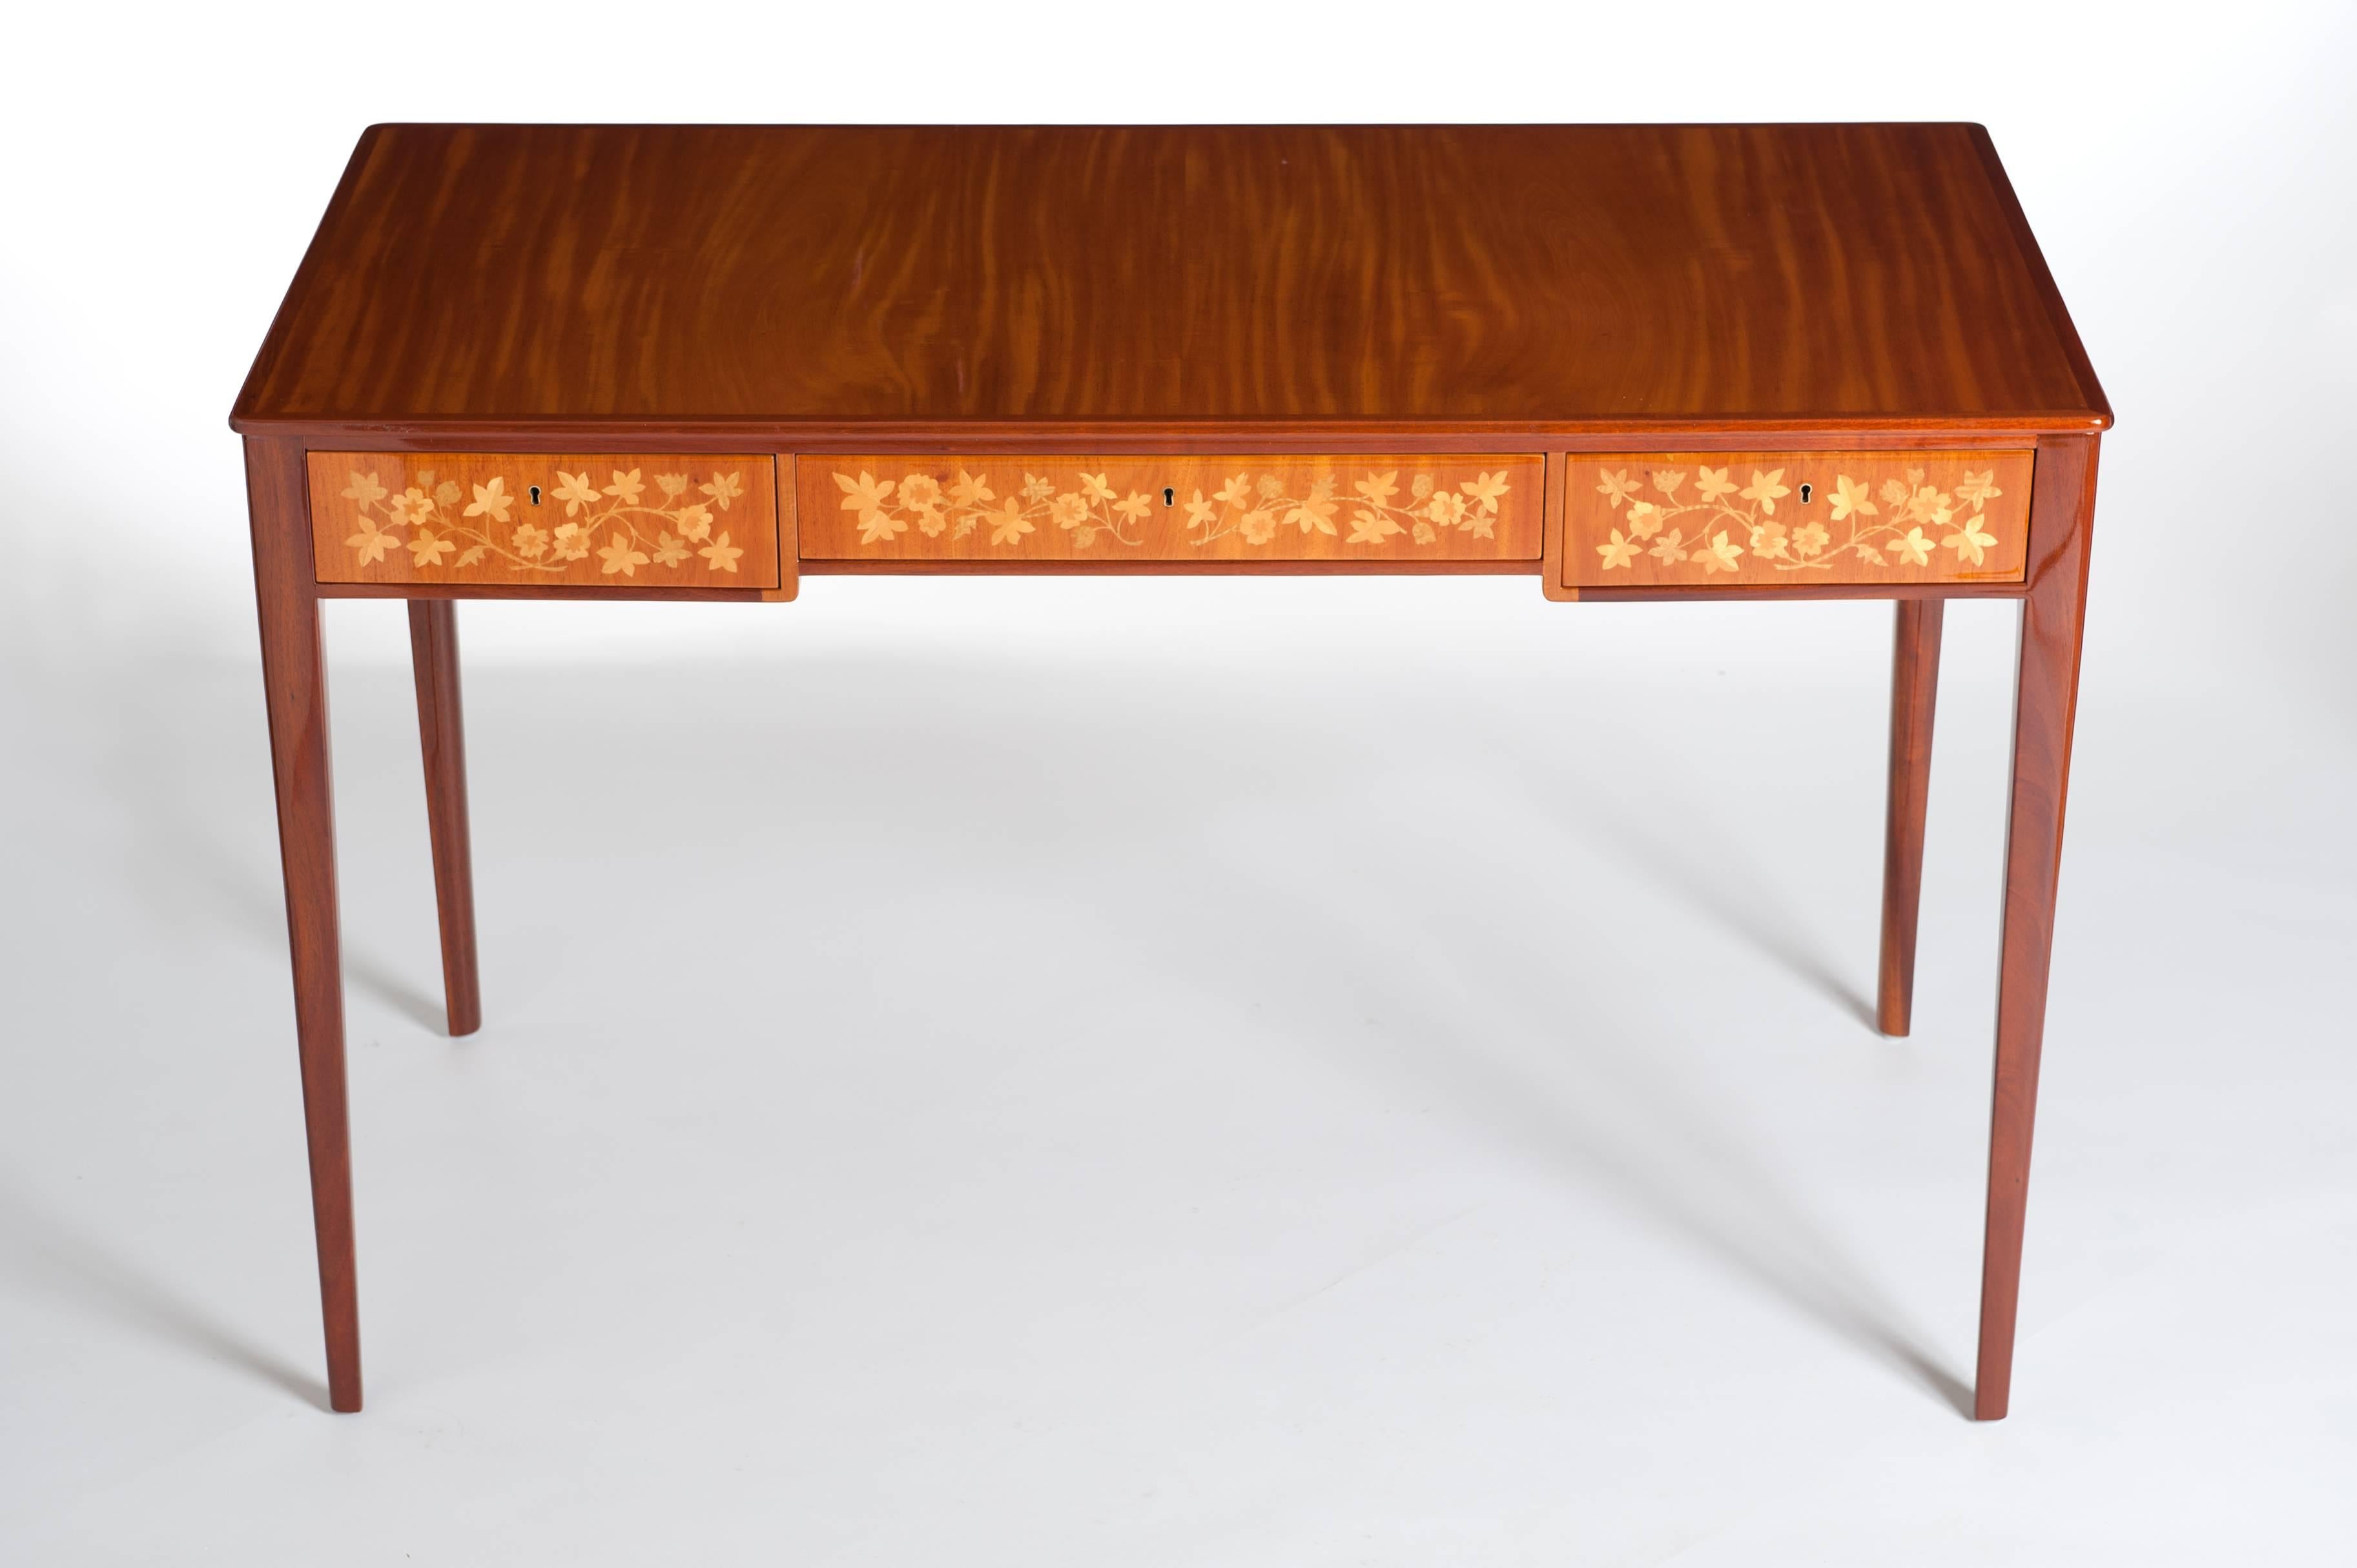 Art Deco Swedish Carl Malmsten Desk Bright Mahogany Wood with Marquetry from the 1930s